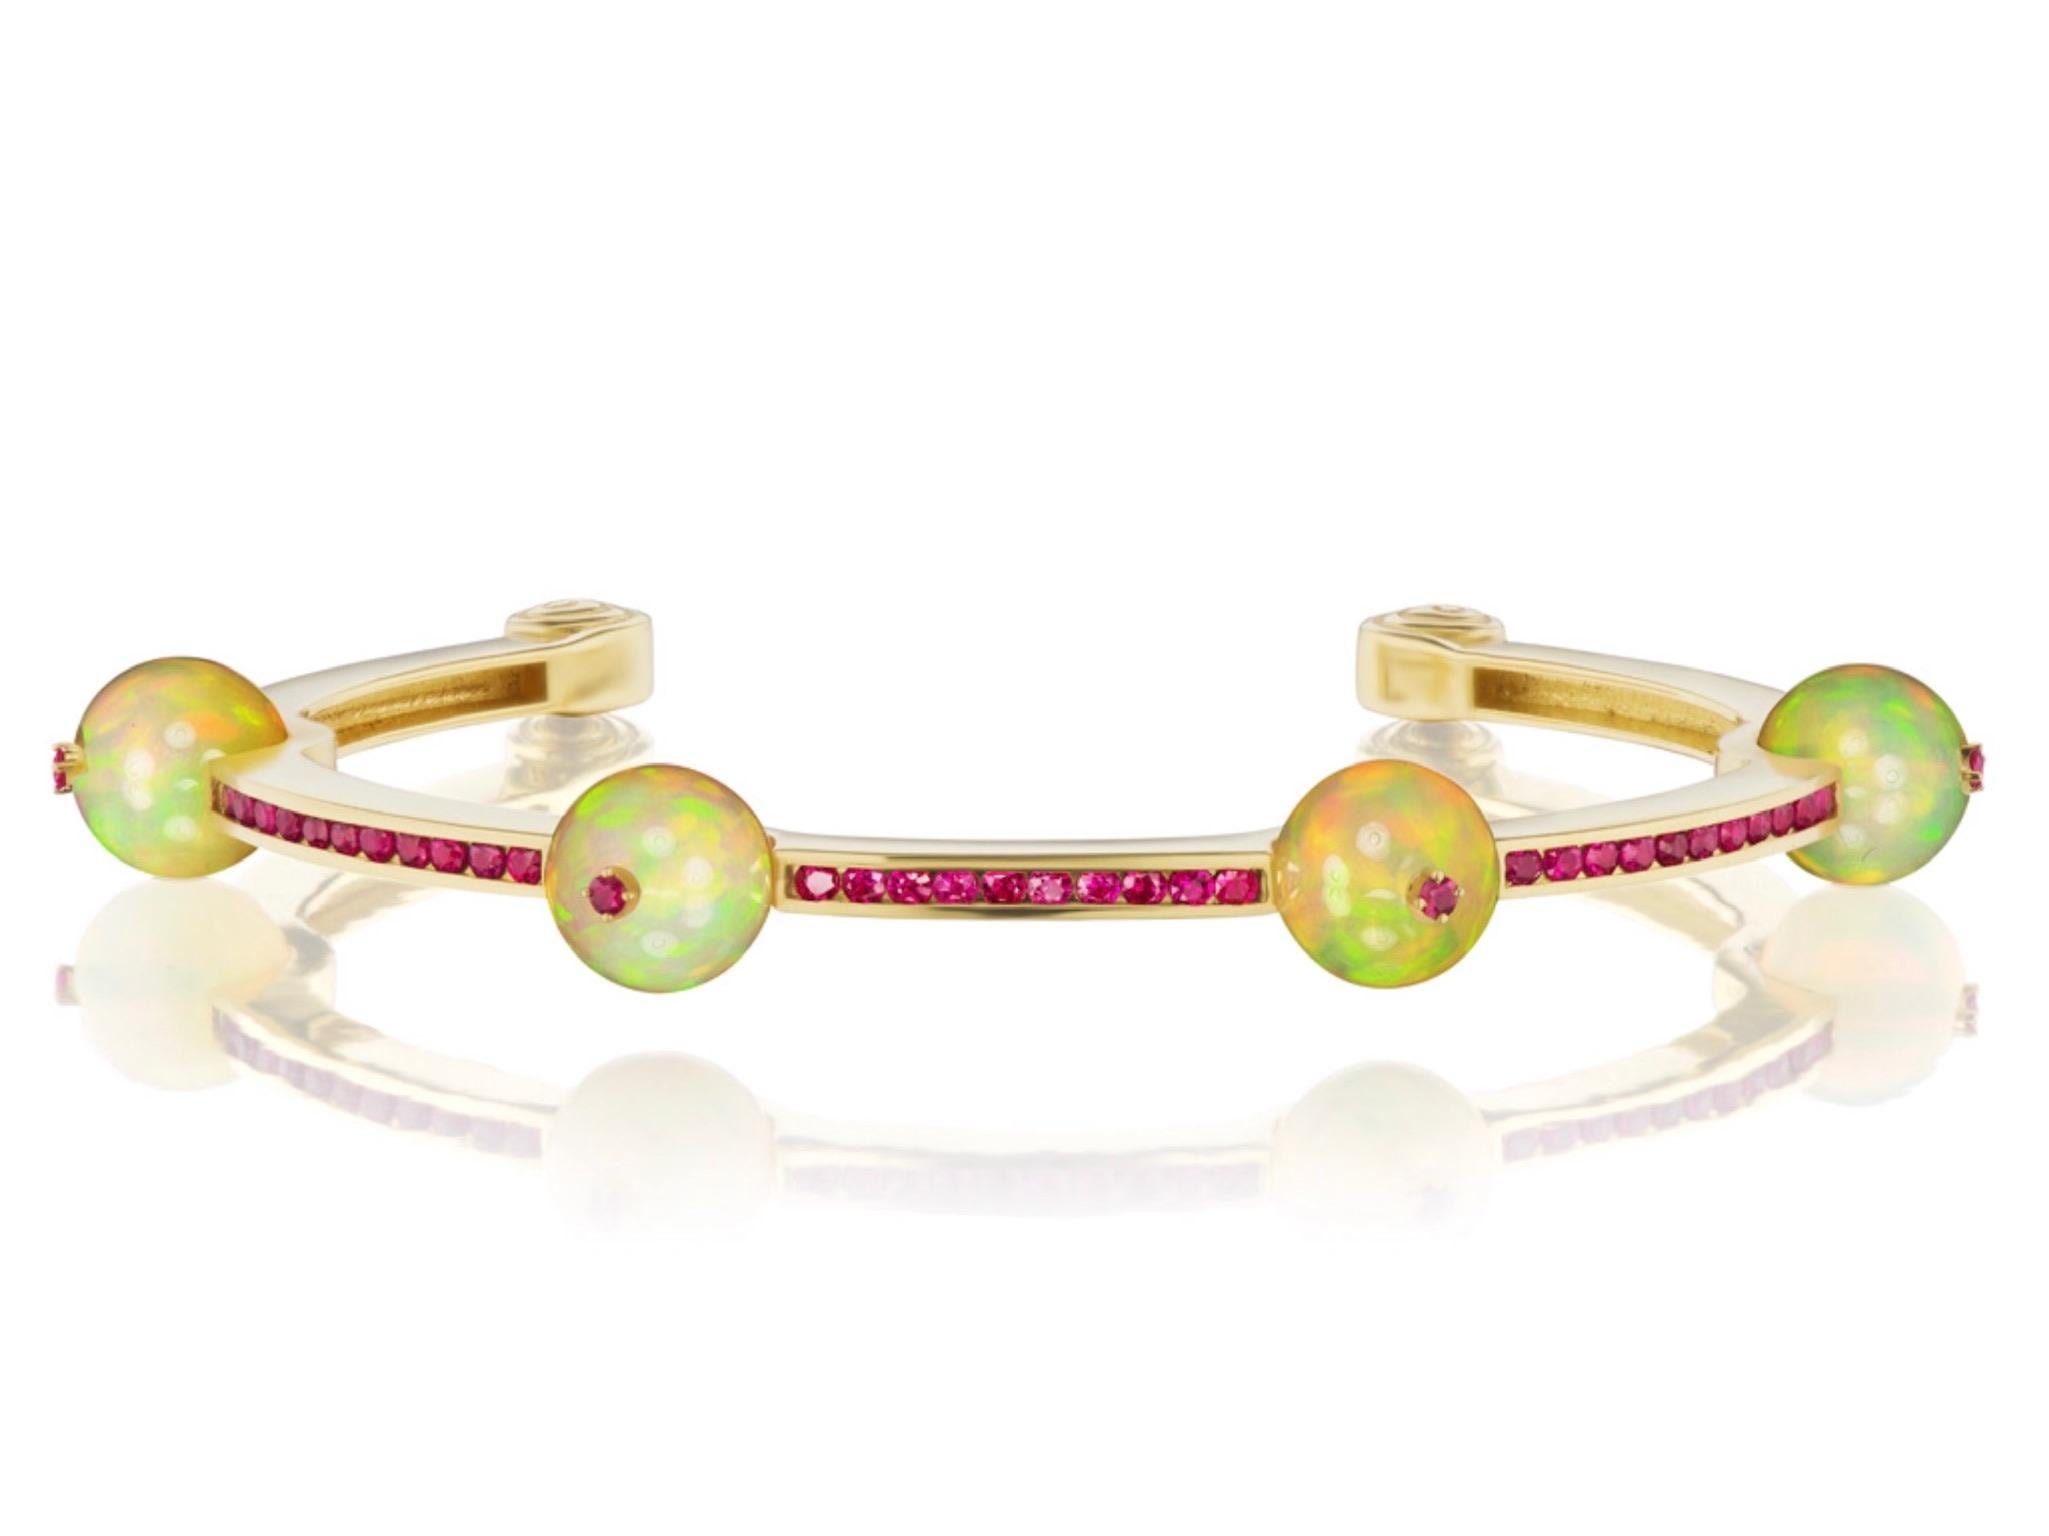 34.5 carats of vibrant African opals with a spectacular play-of-color make up this new bracelet by Andrew Glassford. They are 8.5mm round opals and the bracelet is part of his Booster series. It contains 1.35 carats of round brilliant rubies and is